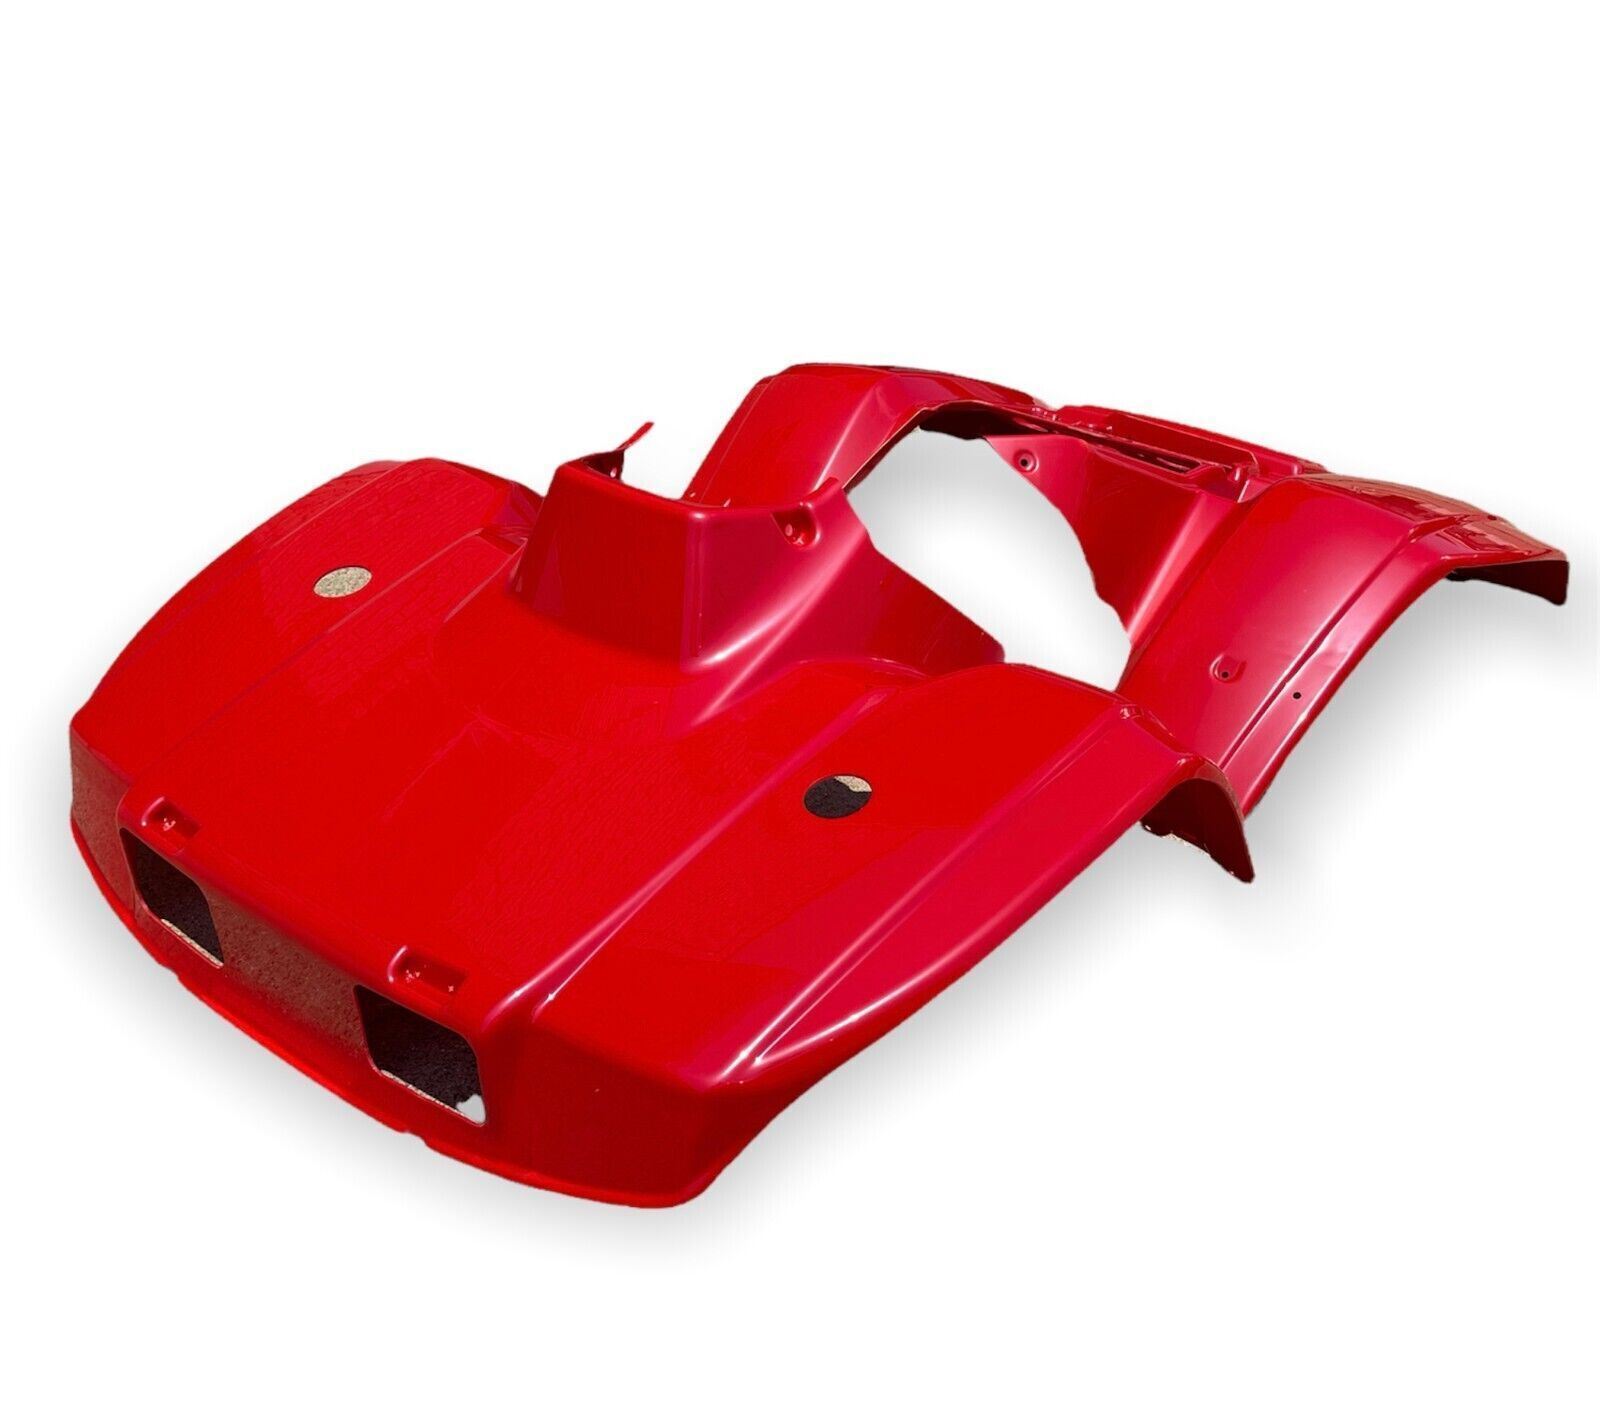 KTX  Pro for Honda TRX300 TRX 300 Heavy Duty Front and Rear Fenders 88-00 Red